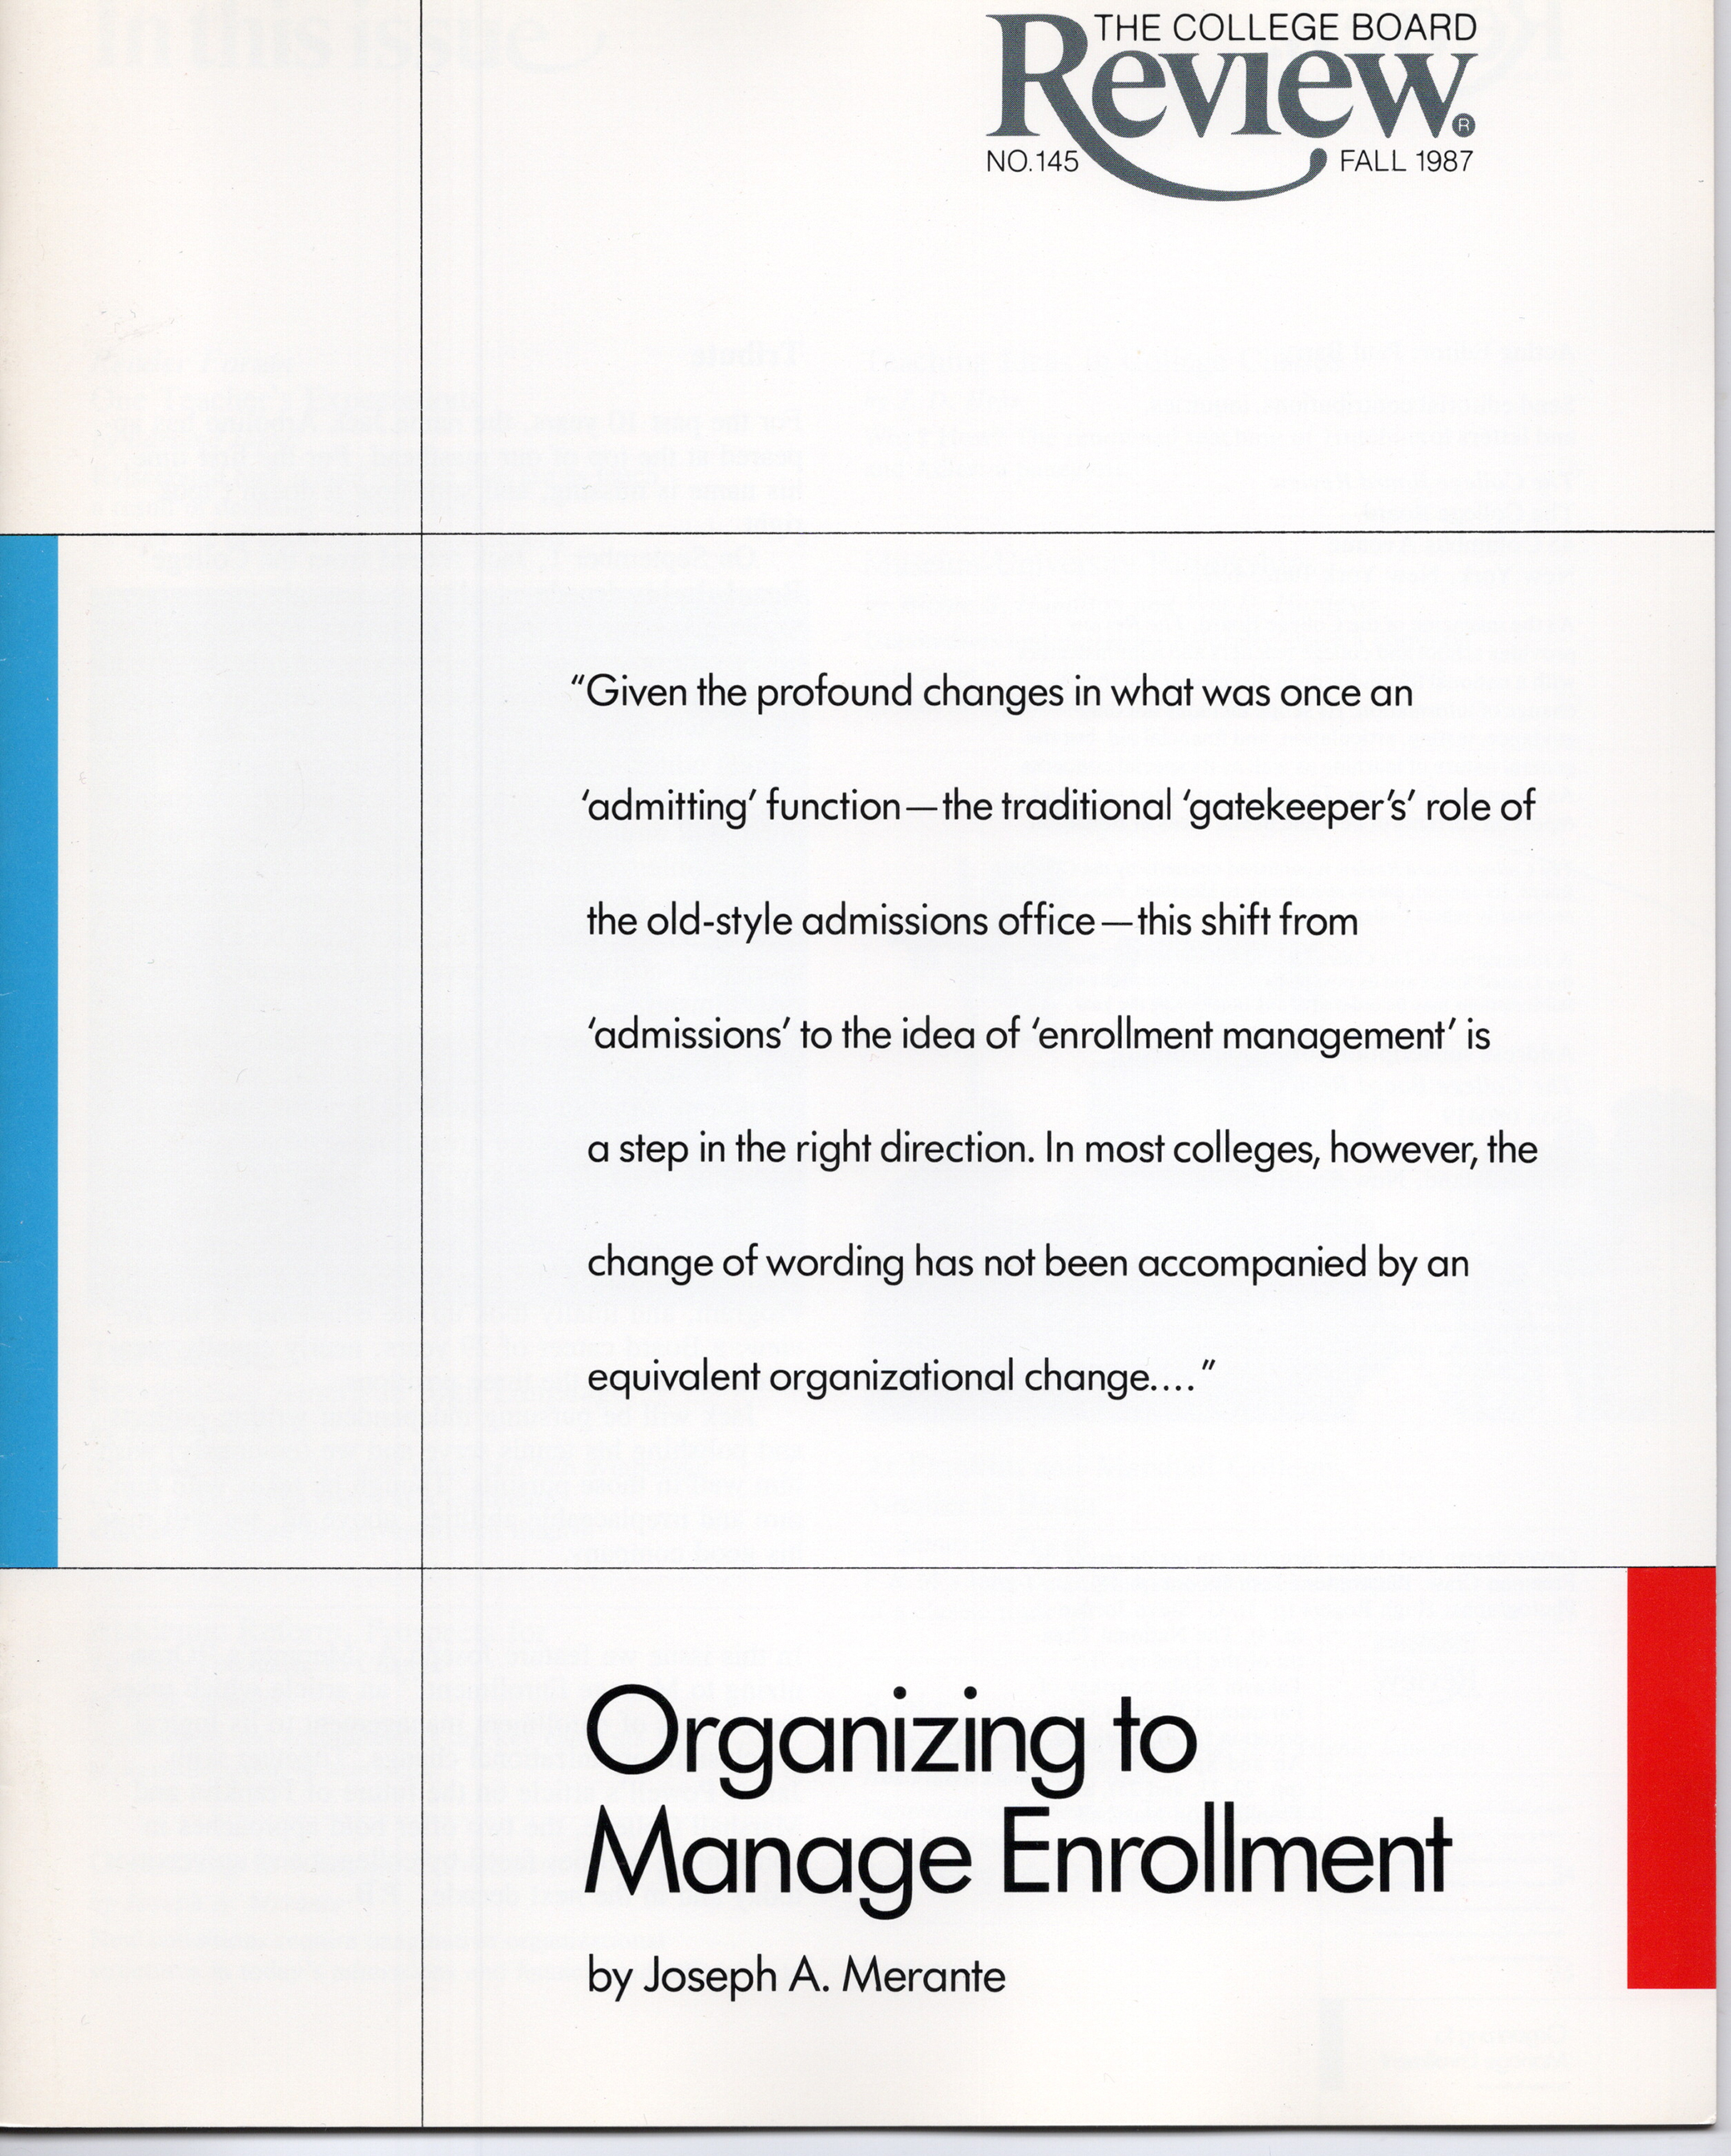 Cover of Fall 1987 issue of the College Board Review